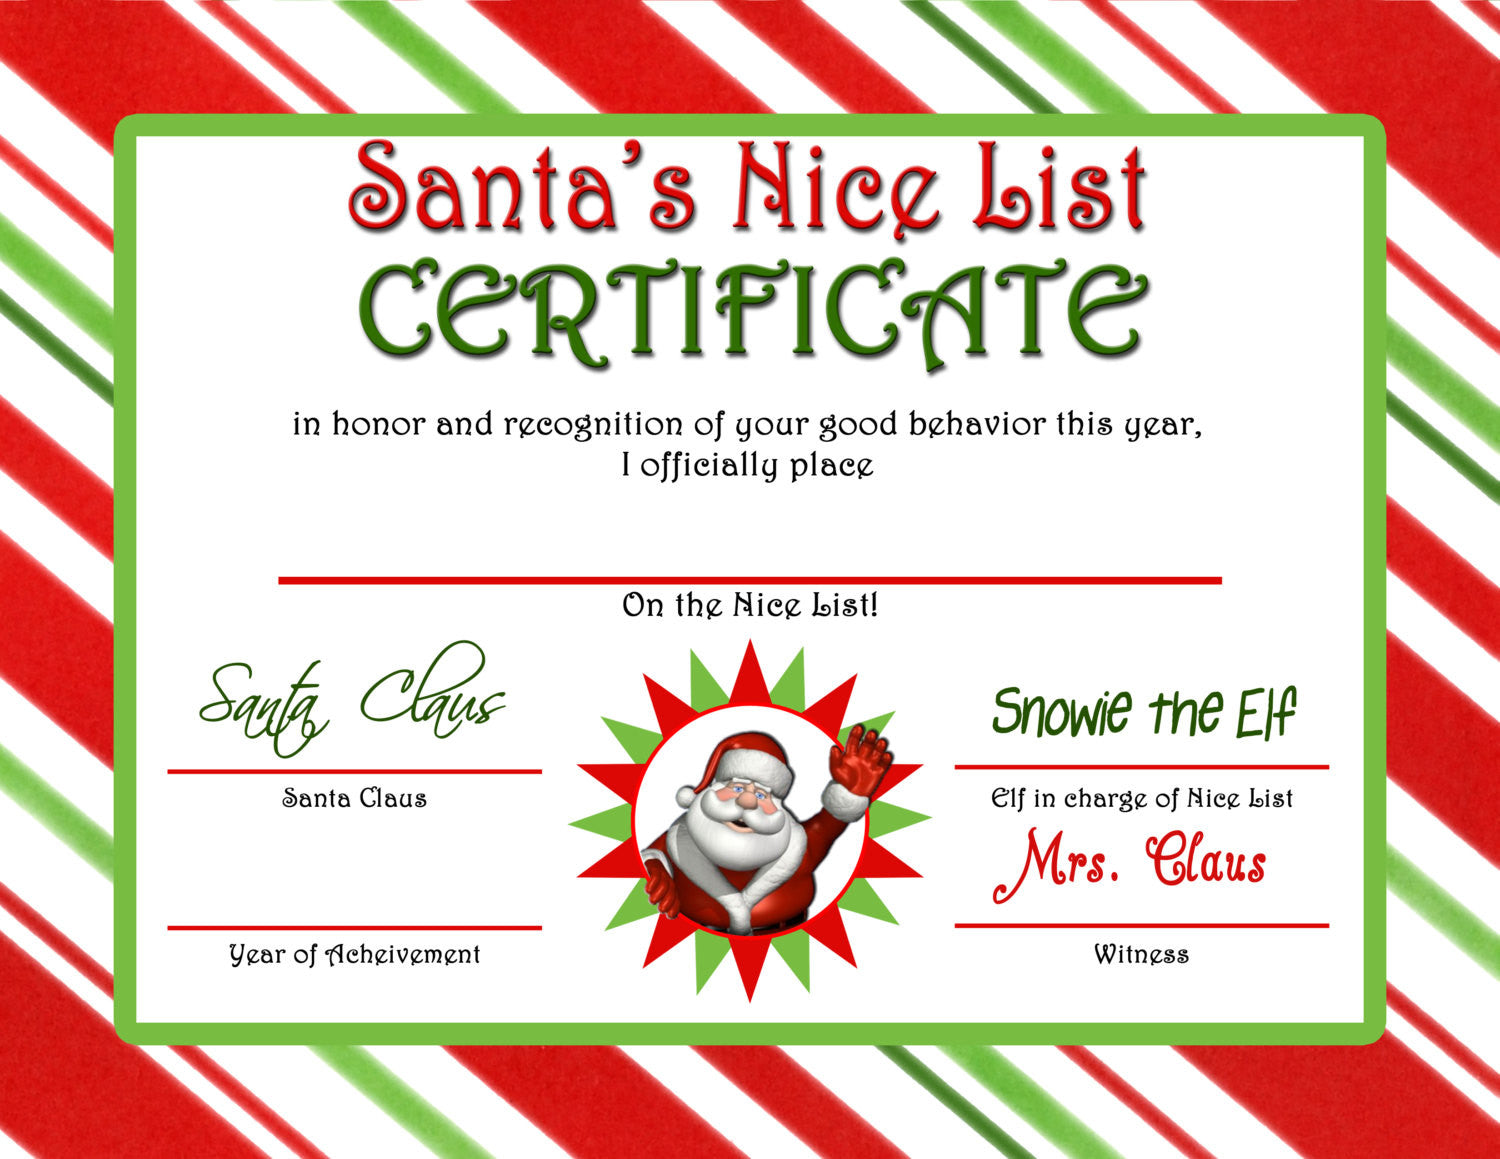 Letter From Santa & Nice List Certificate - Instant Download JPEG (M10 - Quite Possibly Perfect ...